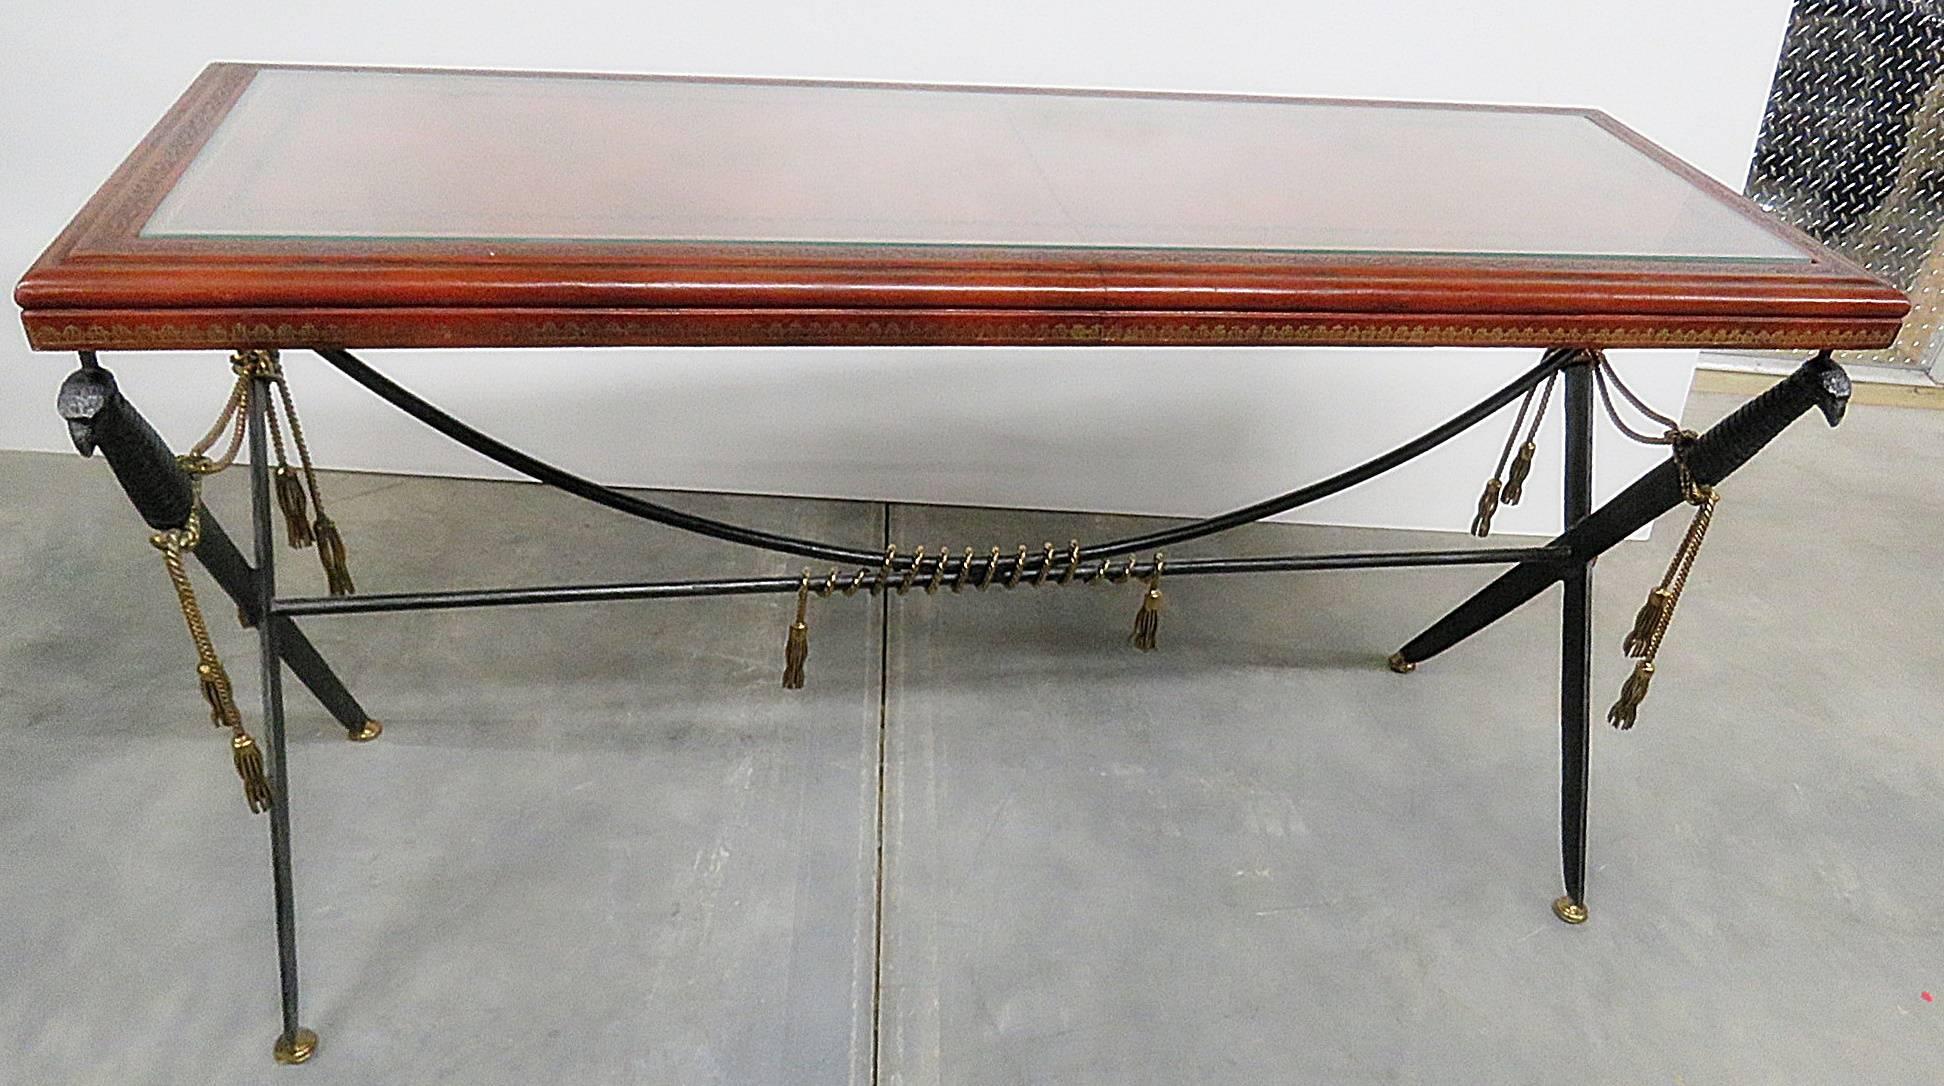 Empire style console table with glass over leather top.